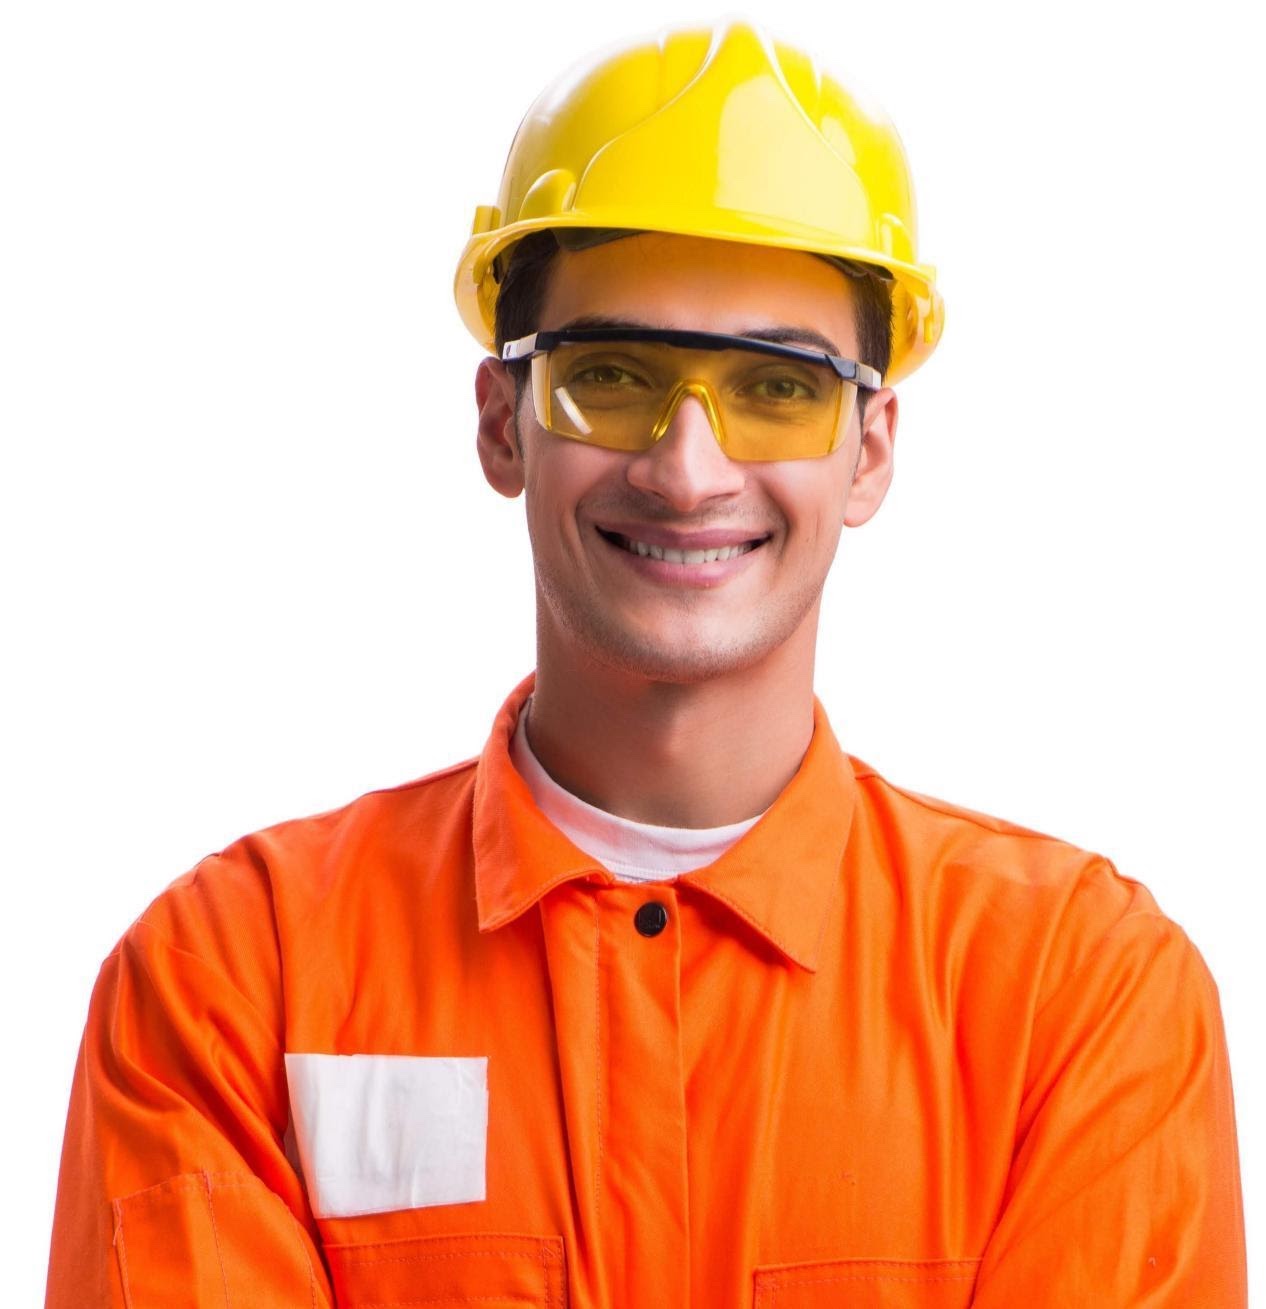 Safety glasses are a must-worn item in risk environments, whether that’s at work, play, or home. See how you can get prescription safety glasses.